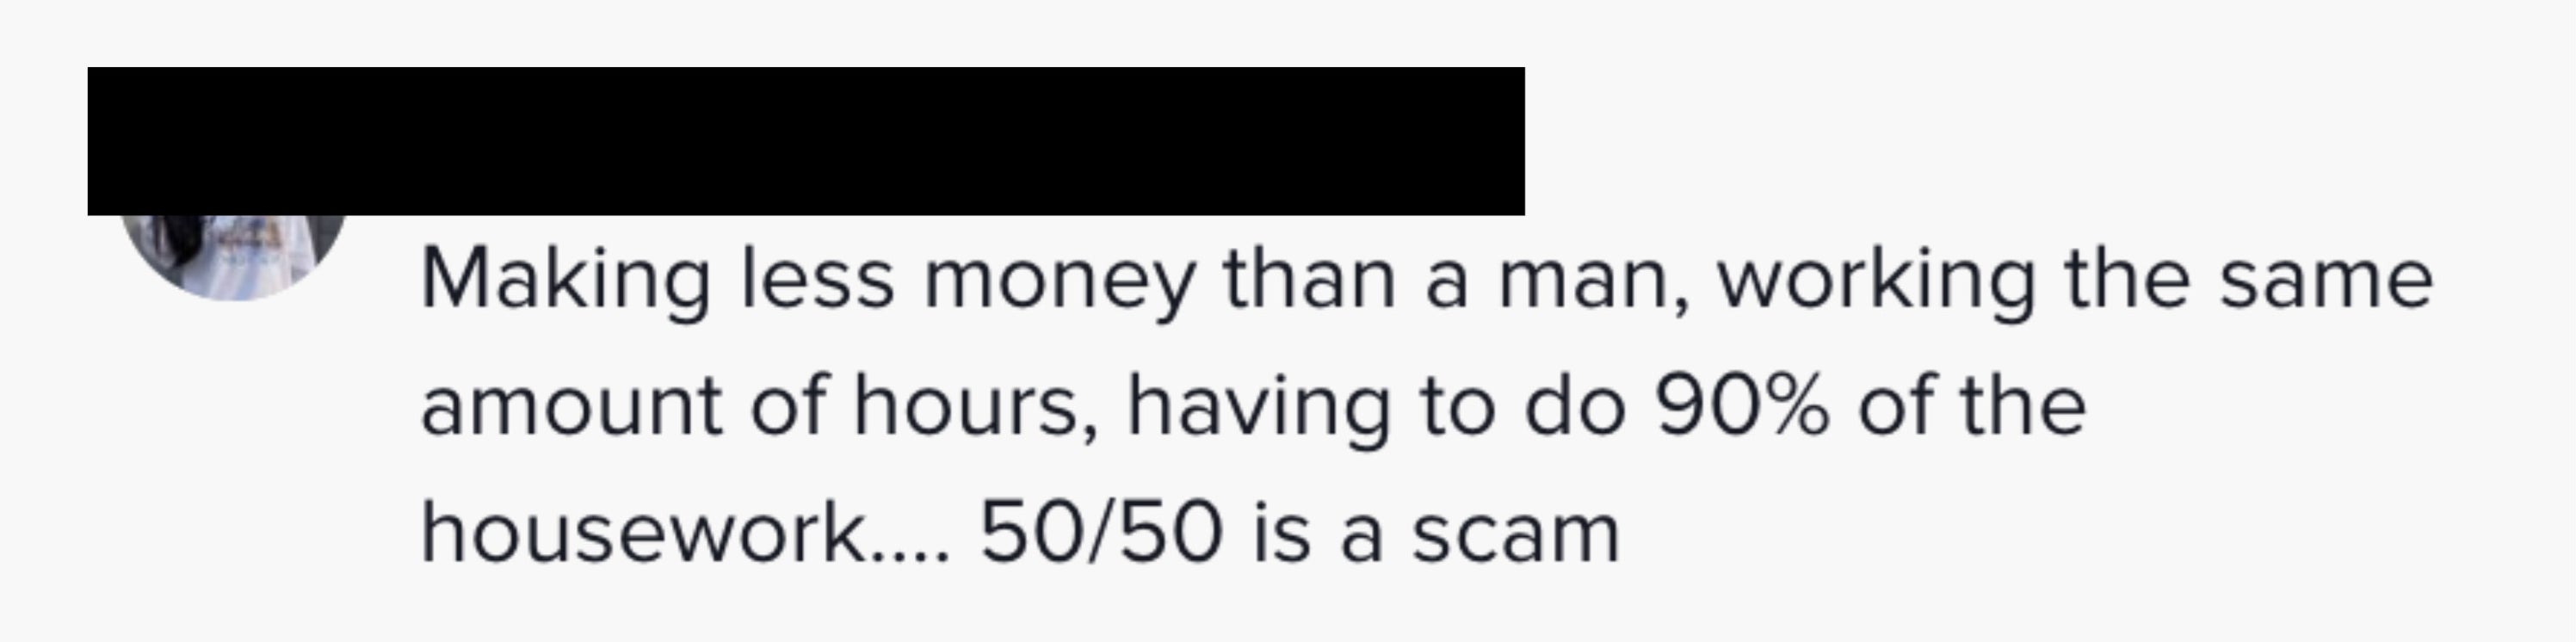 Making less money than a man, working the same amount of hours, having to do 90% of the housework...50/50 is a scam